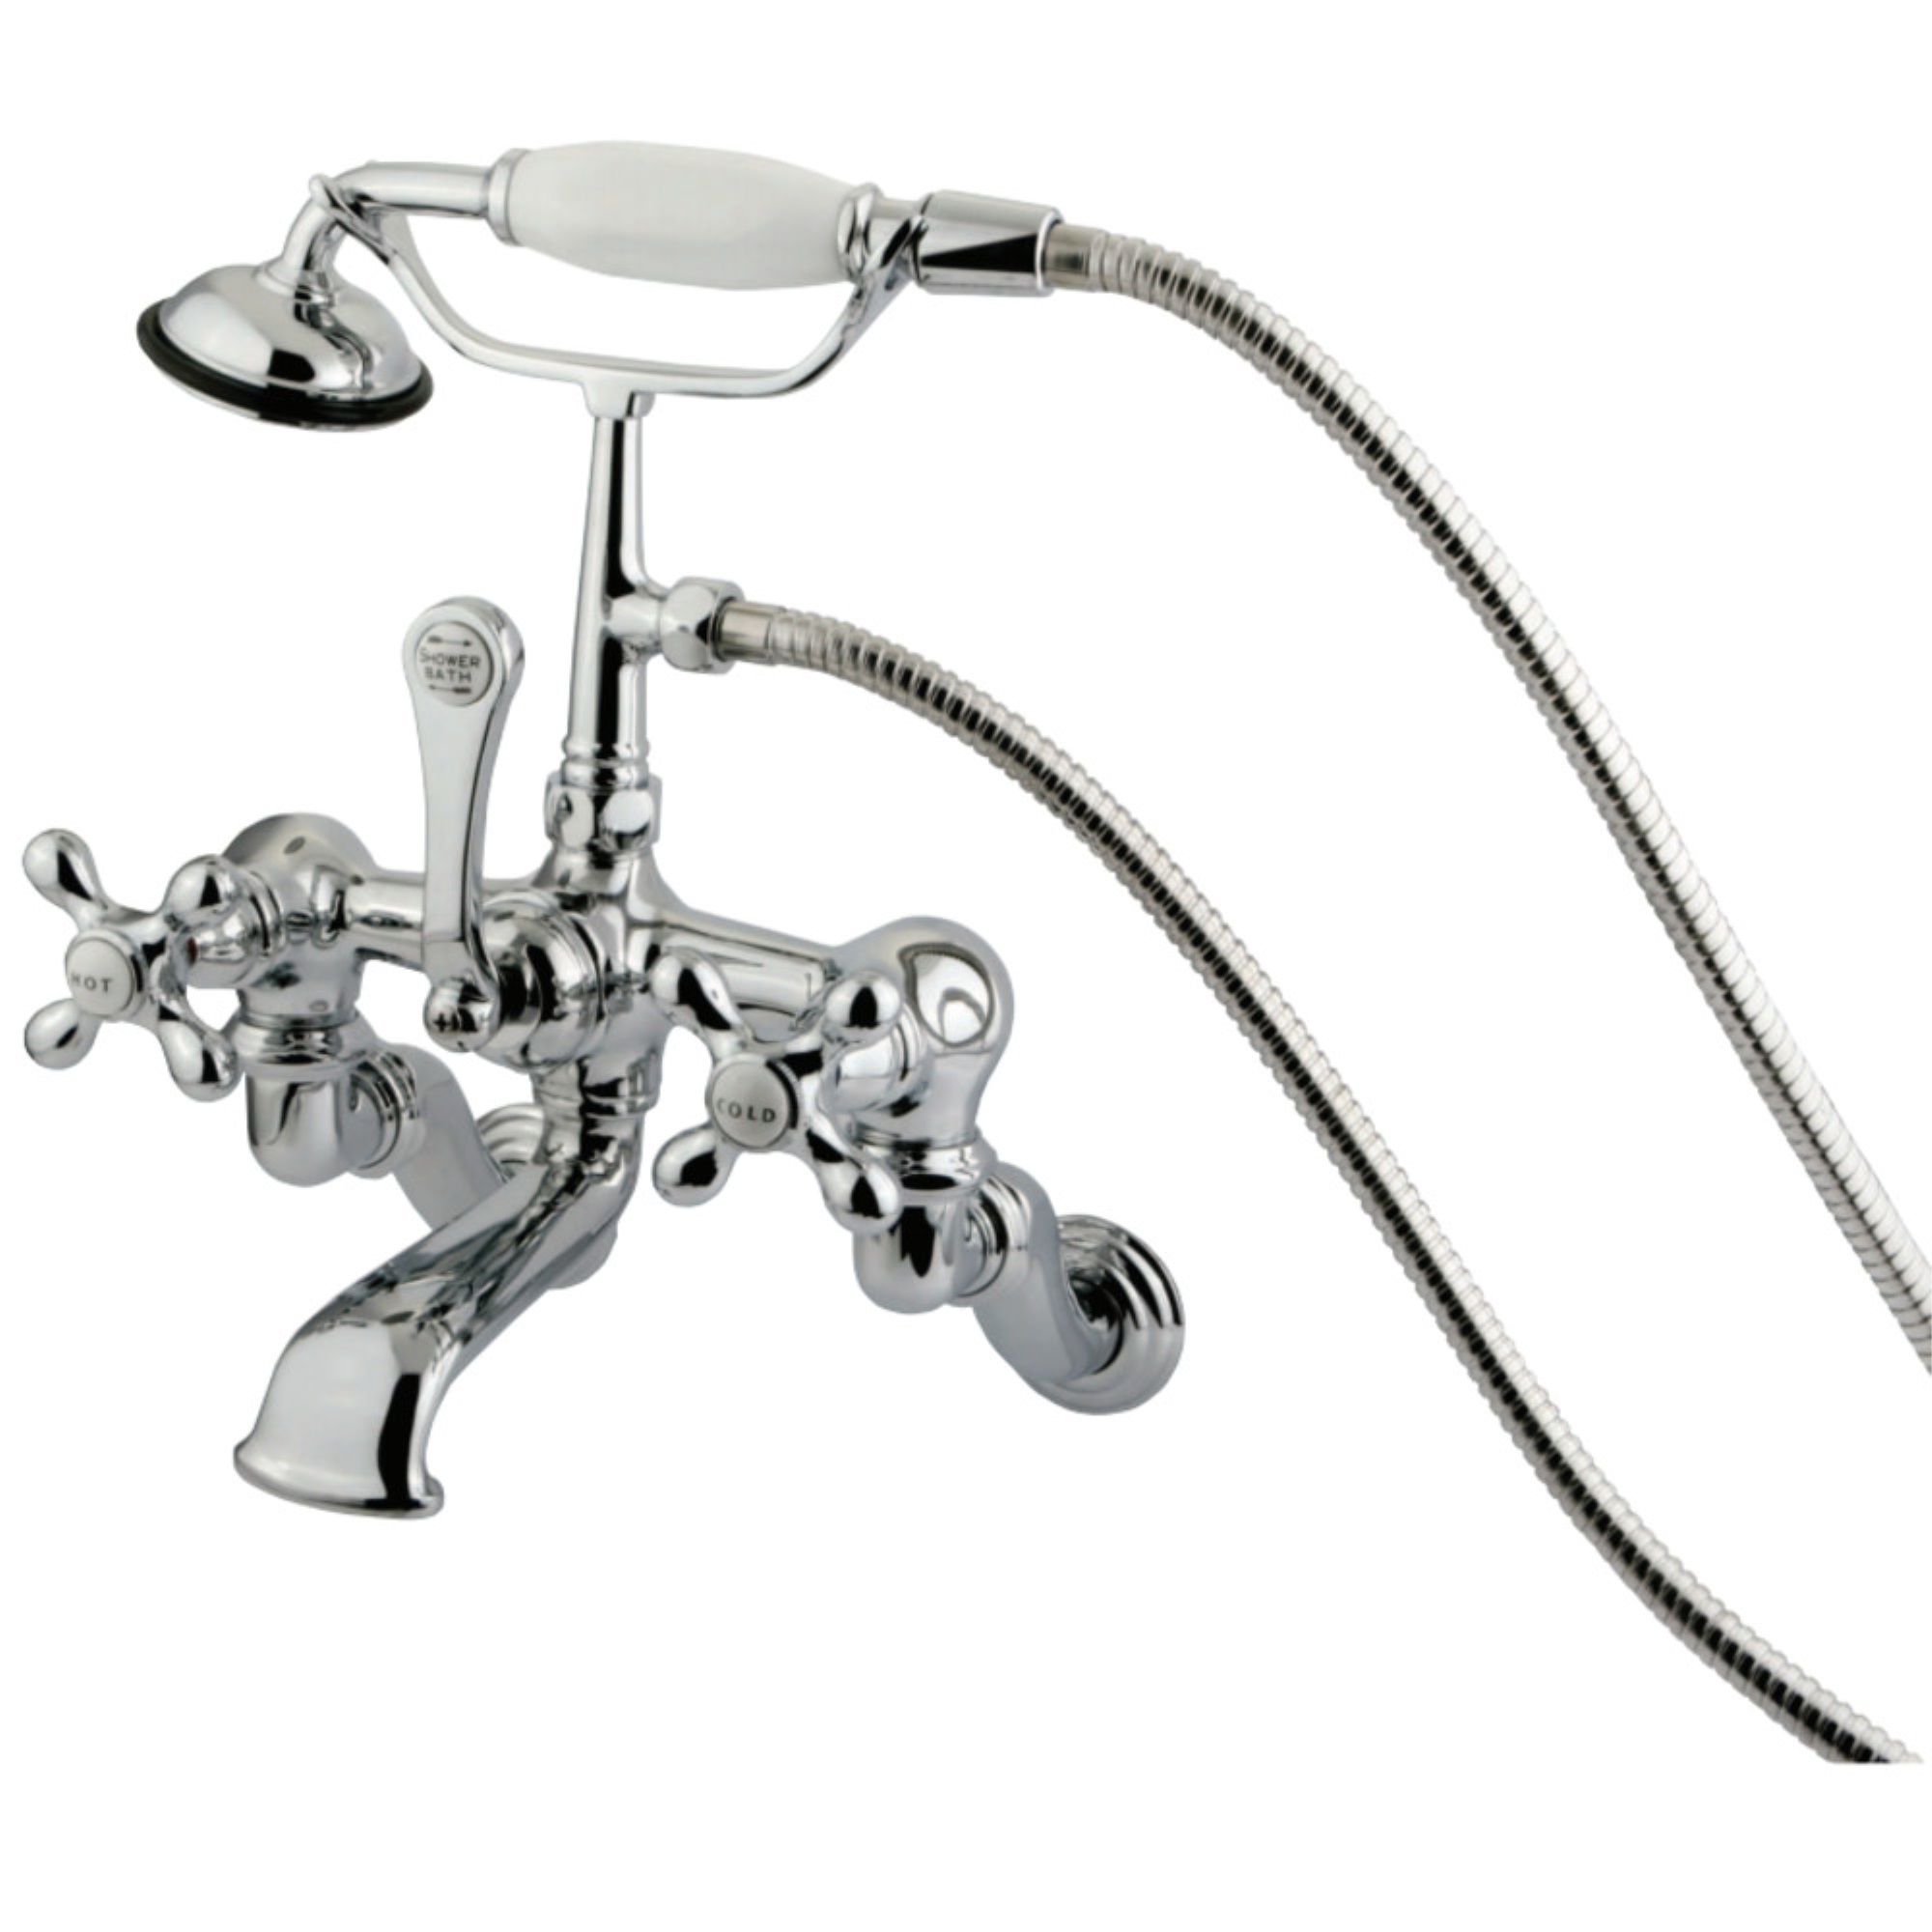 Kingston Brass CC464T1 Vintage Wall Mount Clawfoot Tub Faucet with Hand Shower, Polished Chrome